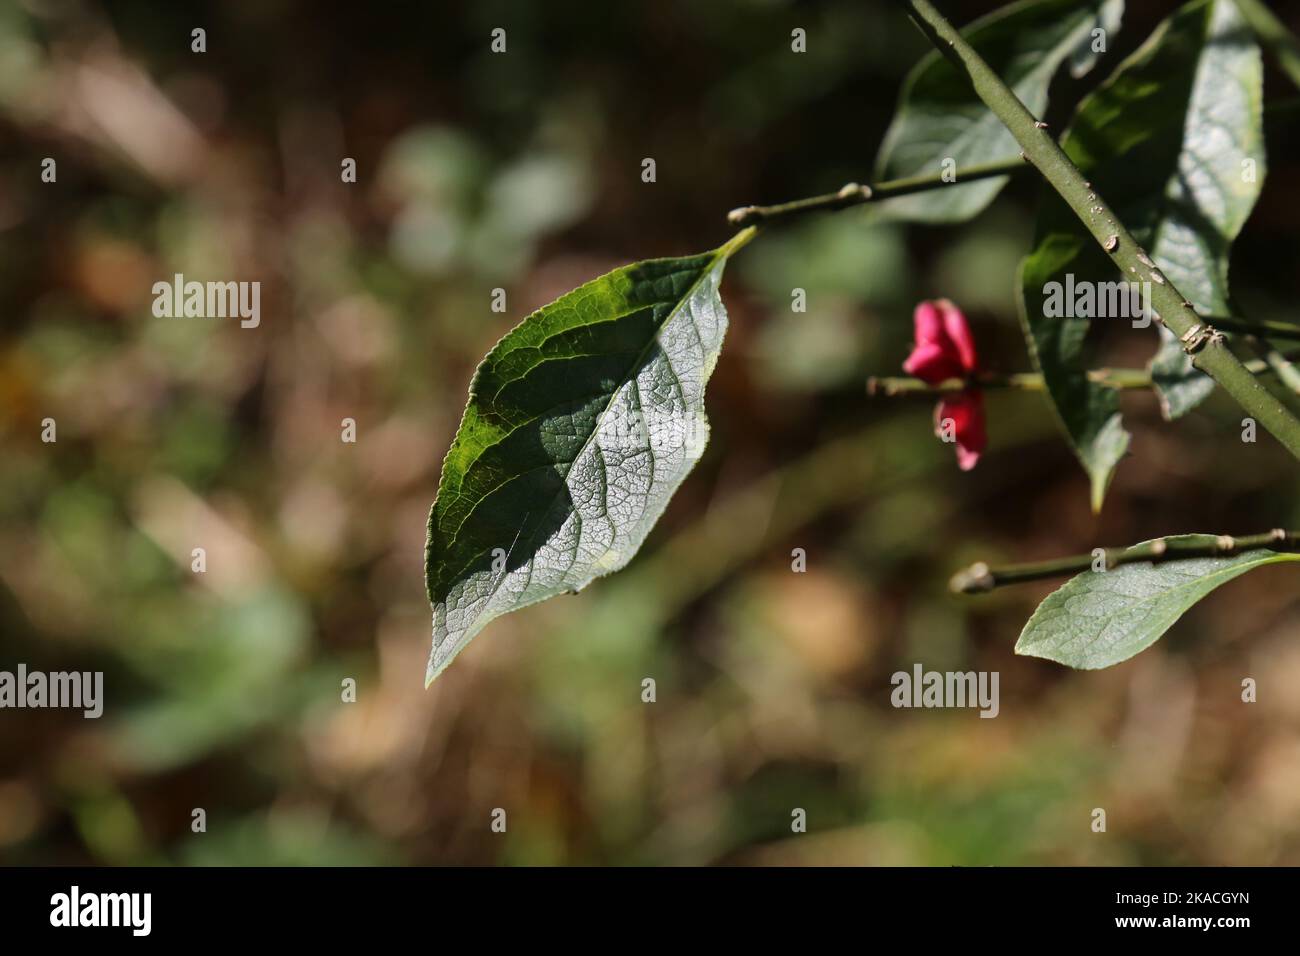 Euonymus europaeus, European spindle, Celastraceae. A wild plant shot in the fall. Stock Photo